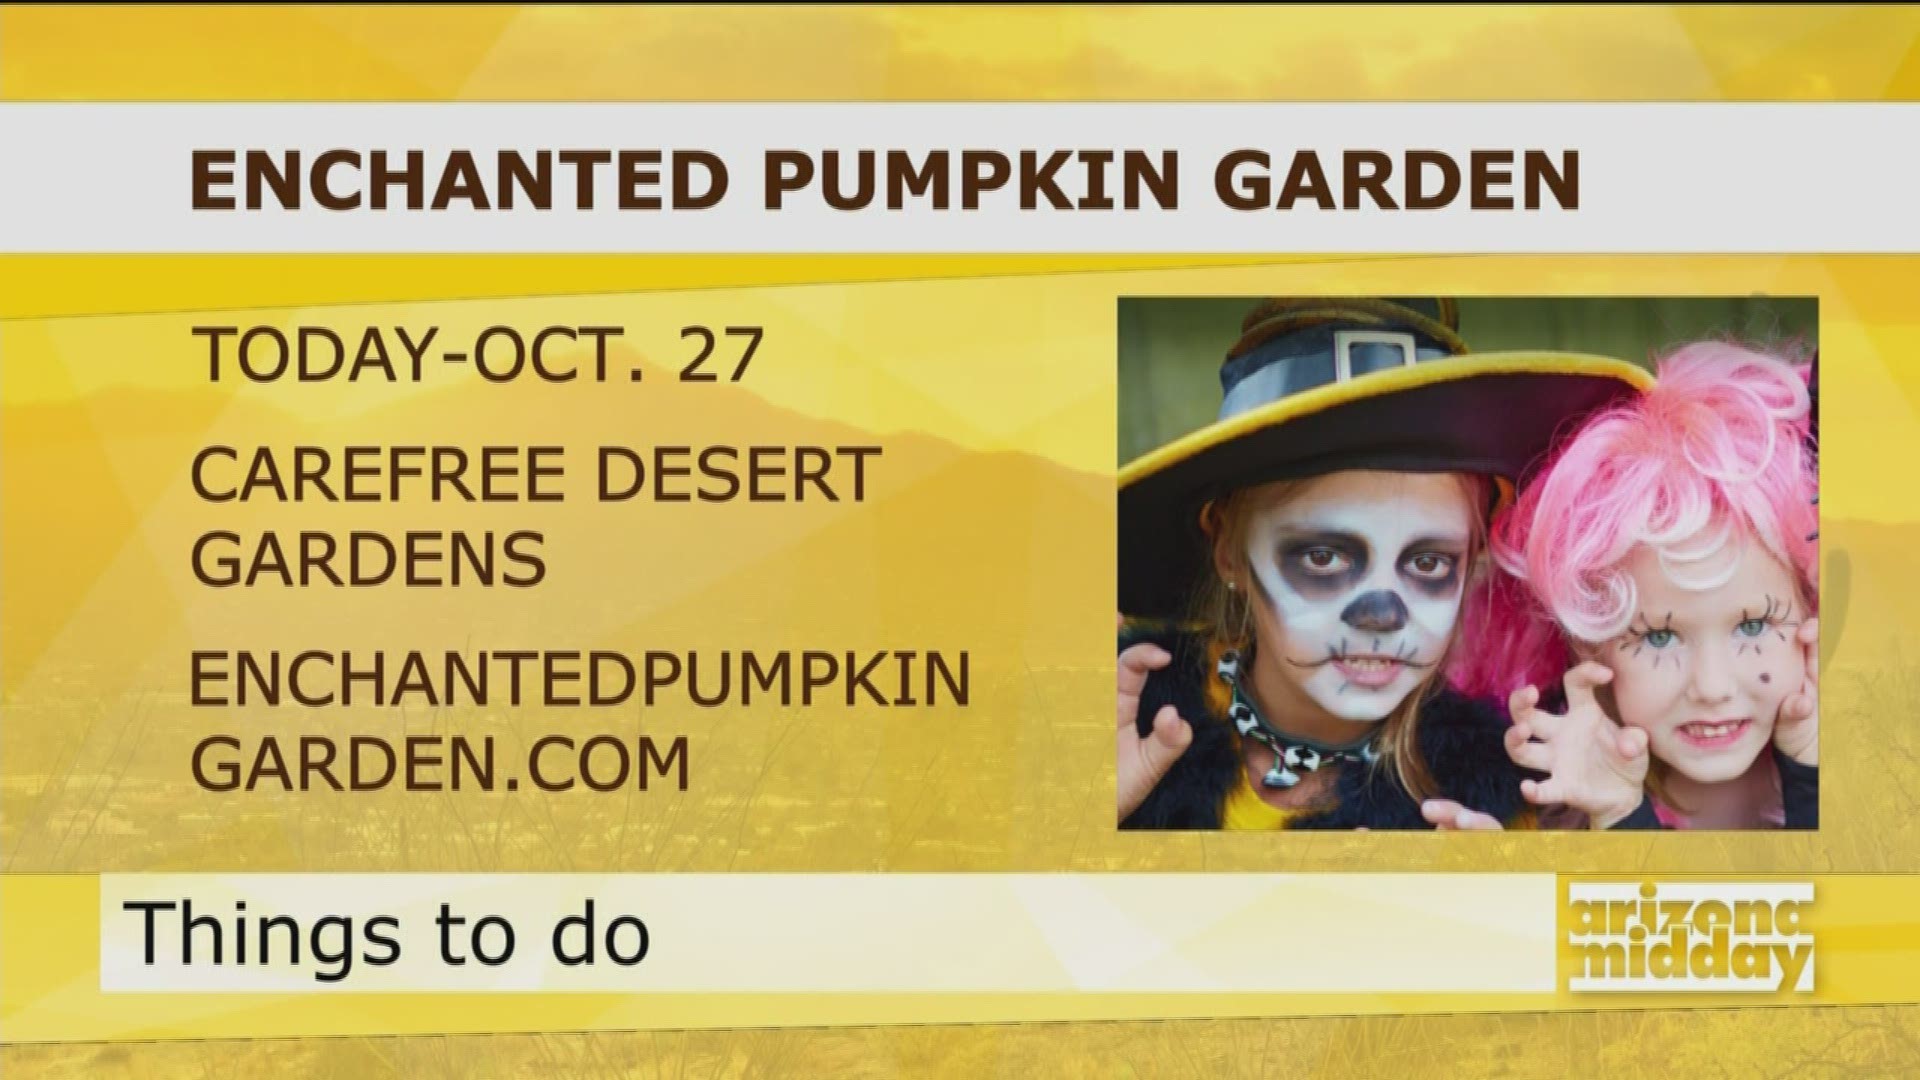 Mala Blomquist tells us all about the events happening this weekend including Halloween fun in Queen Creek, Mesa Fall Festival and more!